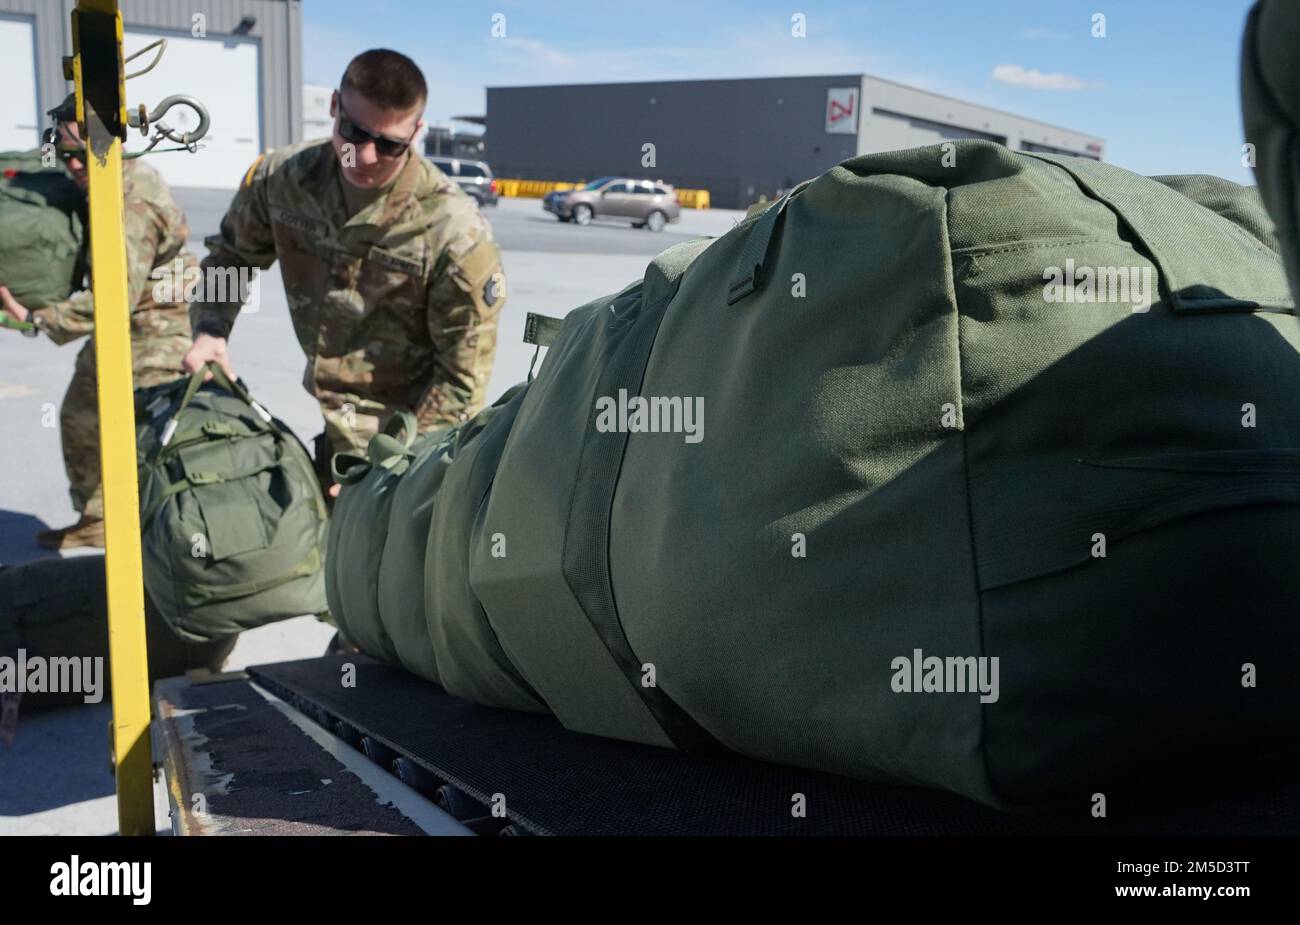 Soldiers from 1st Battalion, 109th Infantry Regiment, 2nd Infantry Brigade Combat Team, 28th Infantry Division, load duffle bags onto the conveyer belt in preparation for depart Harrisburg International Airport on March 4, 2022. The Soldiers begin their deployment to support the Multinational Force and Observer mission in the Sinai Stock Photo